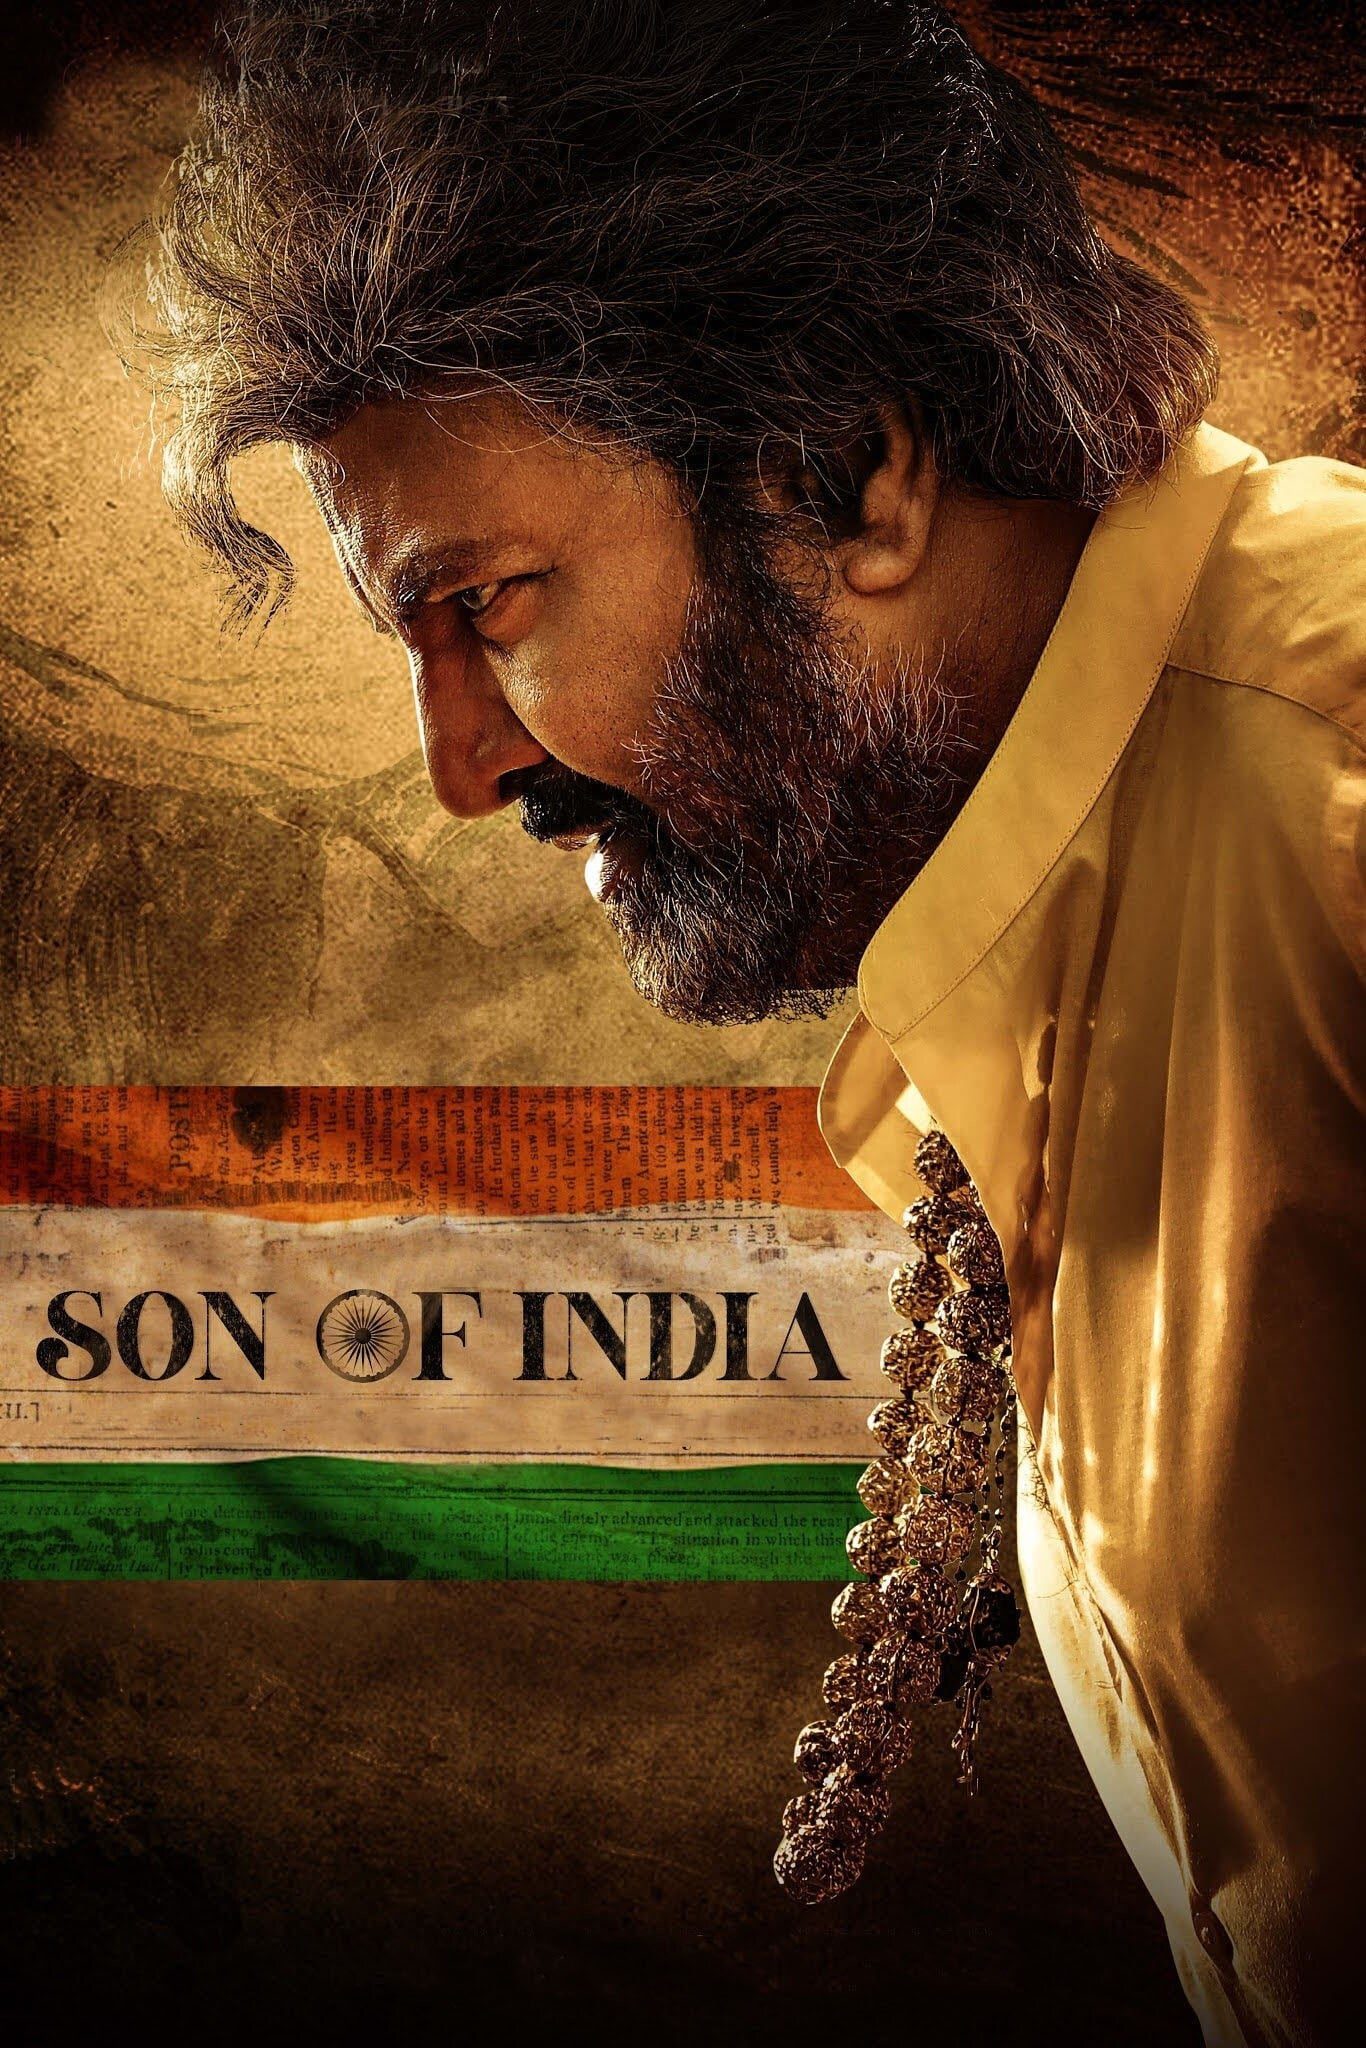 Poster for the movie "Son of India"